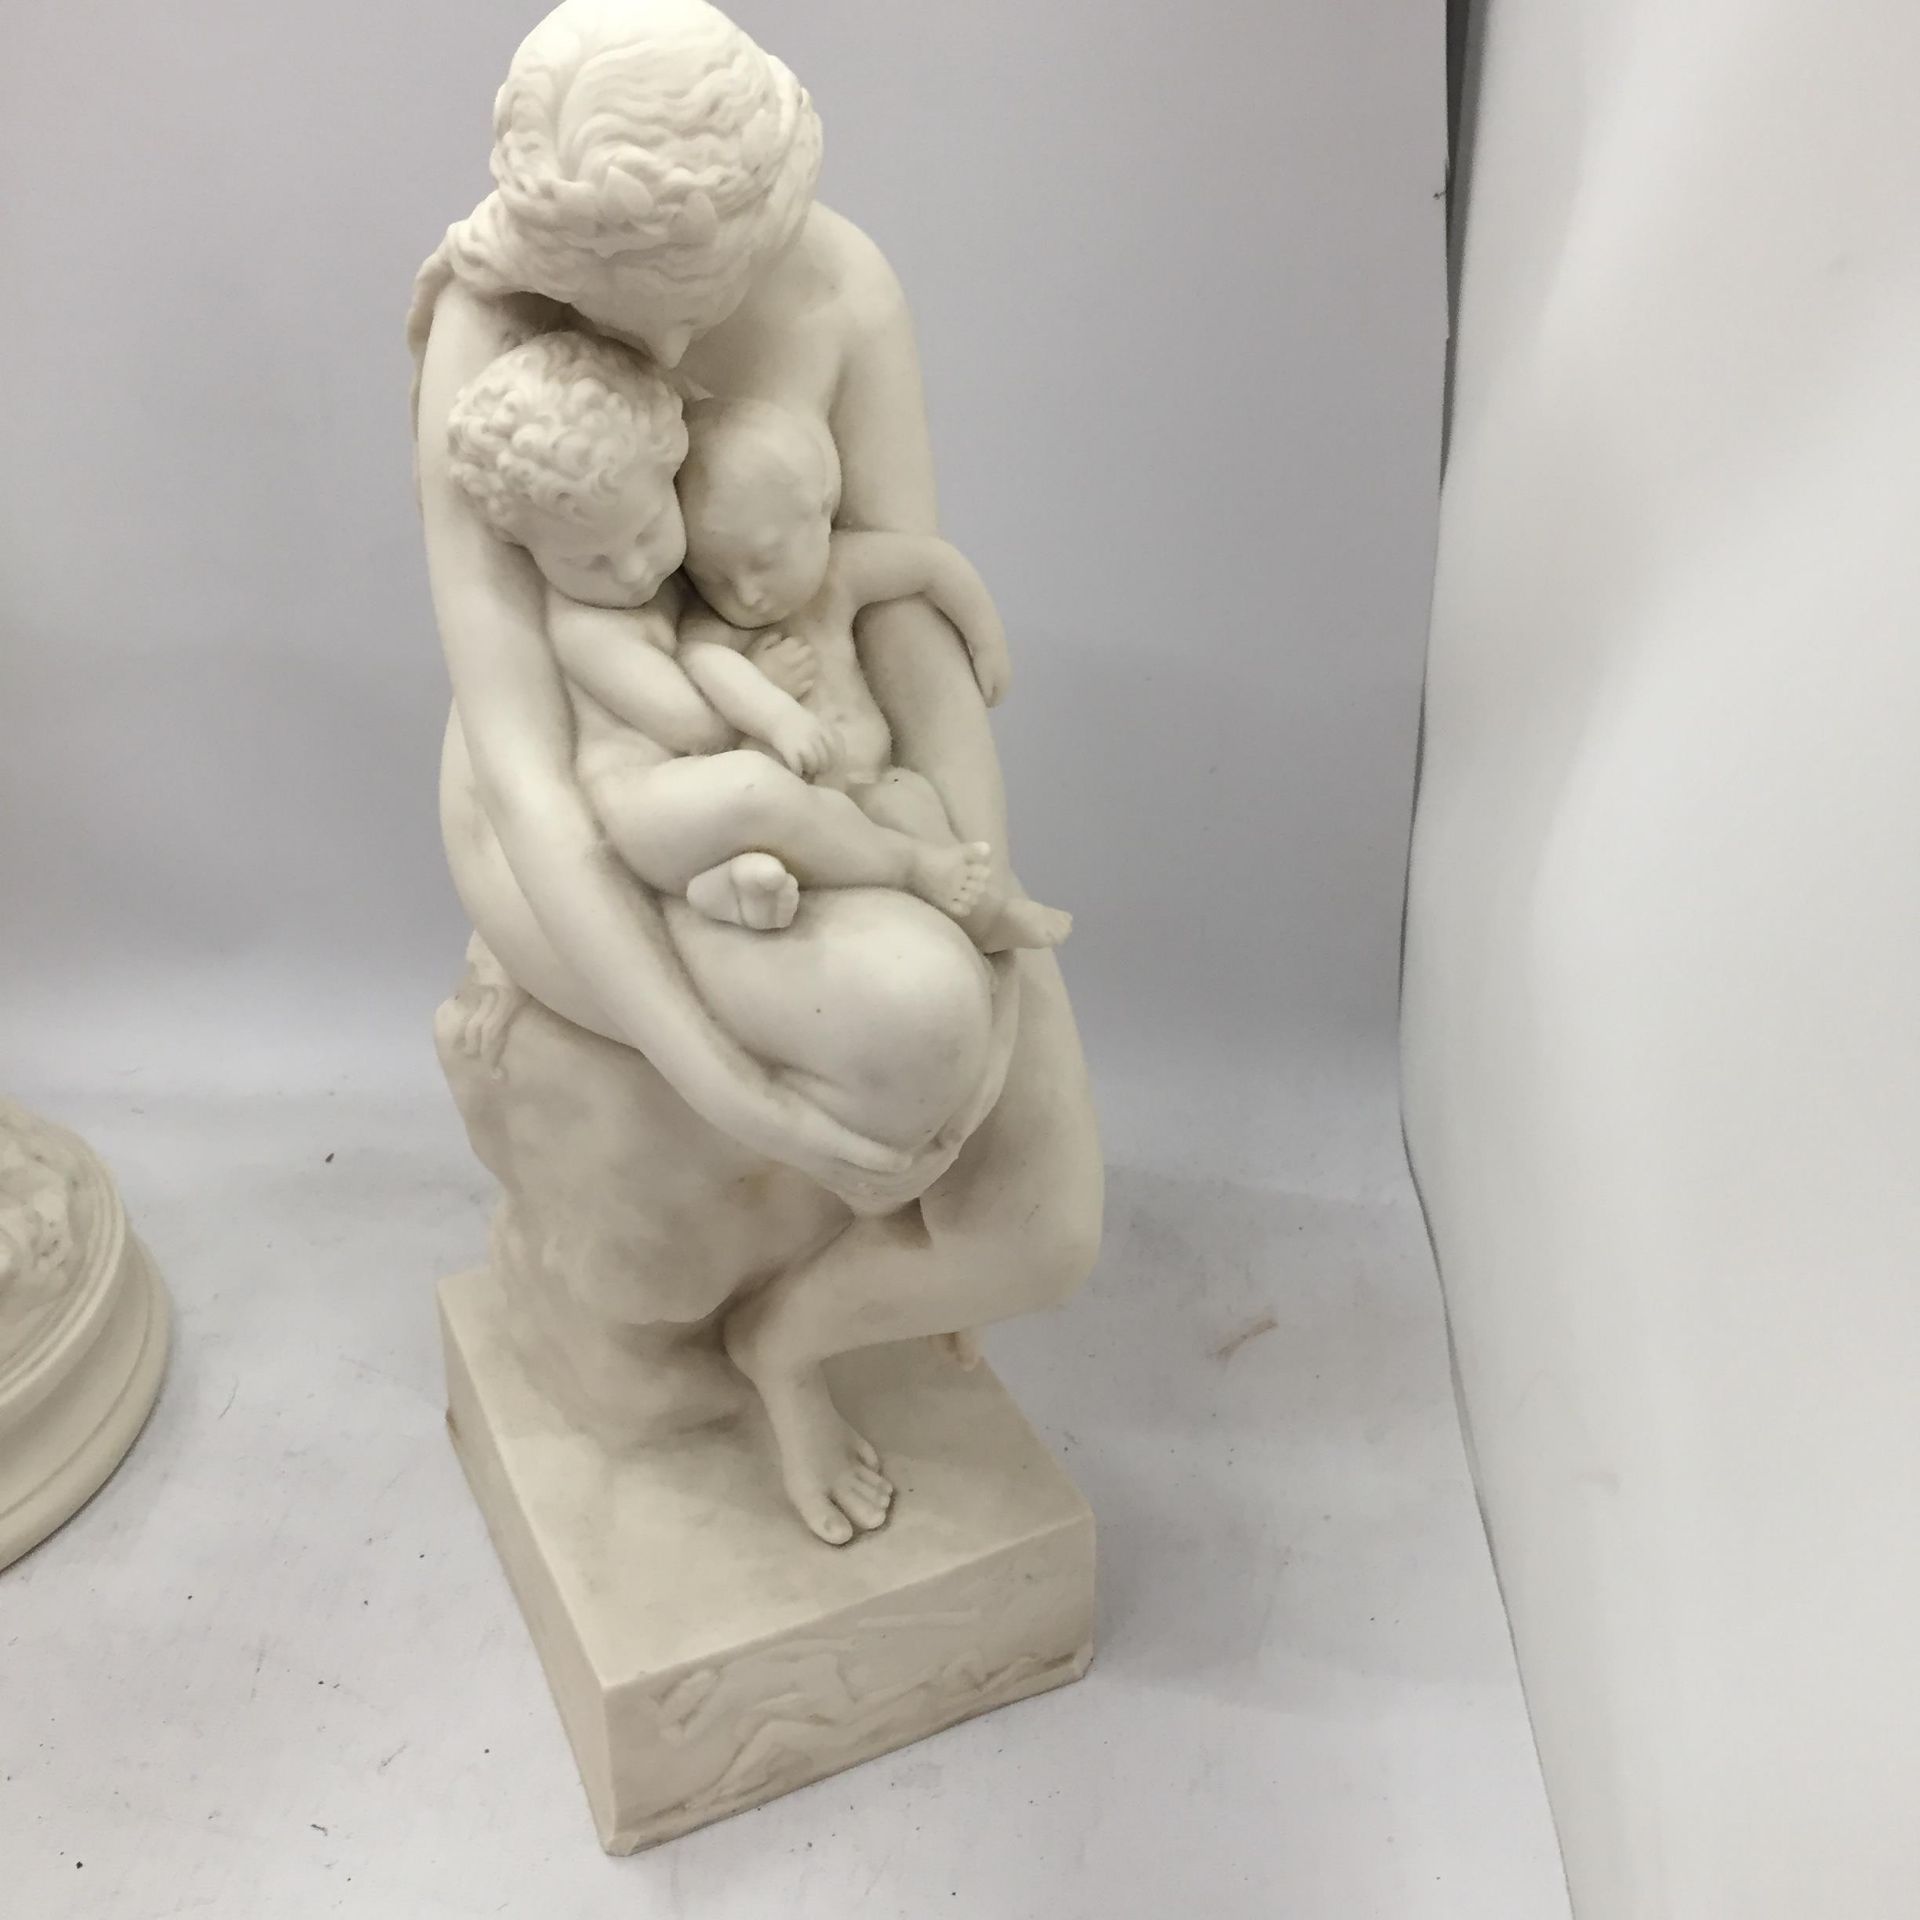 TWO PARIAN WARE FIGURES, ONE OF A MOTHER HOLDING CHILDREN AND THE OTHER TITLED 'JEALOUSY' - Image 5 of 5